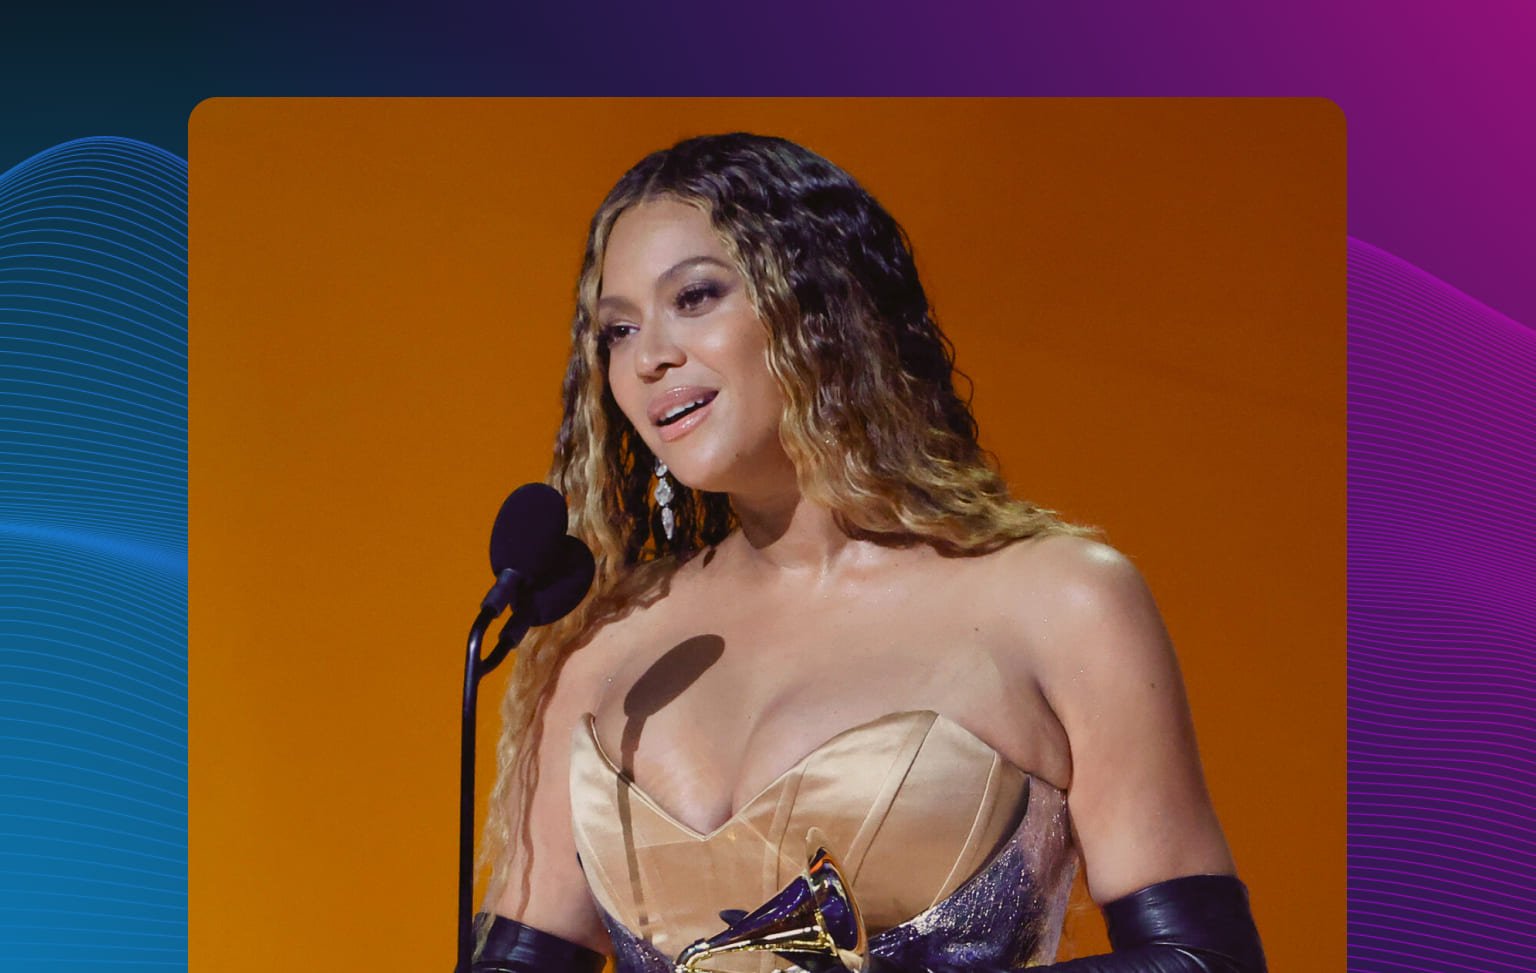 Beyoncé breaks the record for most Grammy awards won